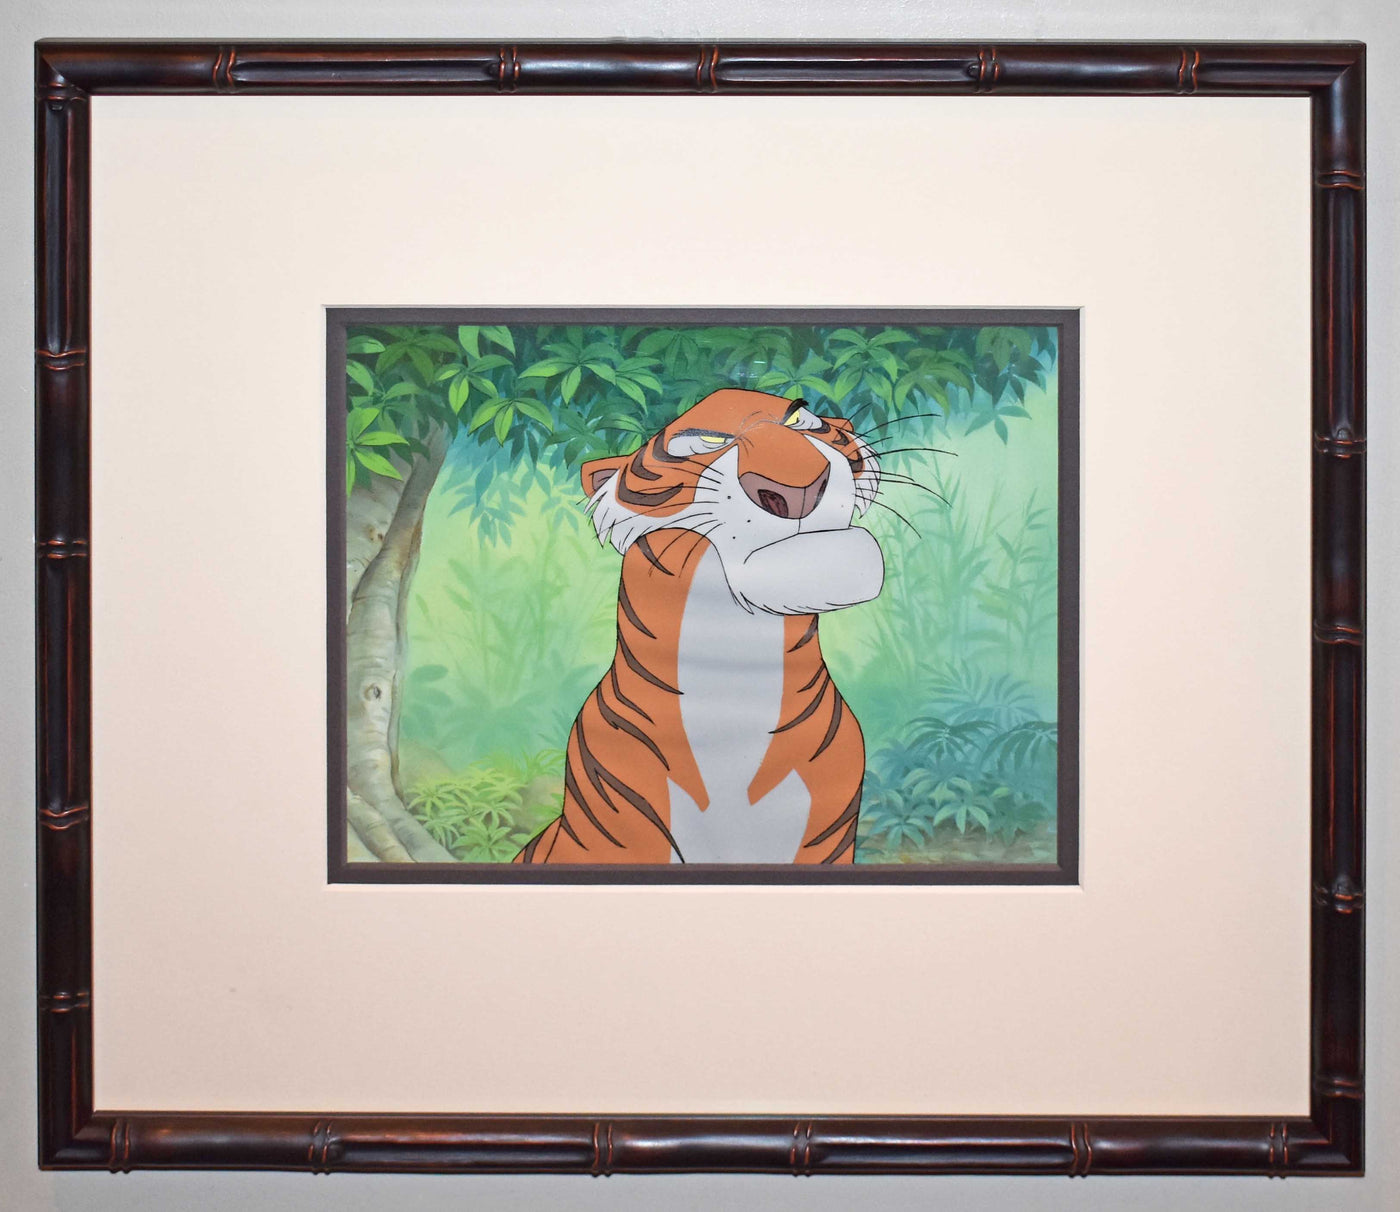 Original Walt Disney Production Cel on Color Copy Background from The Jungle Book featuring Shere Khan